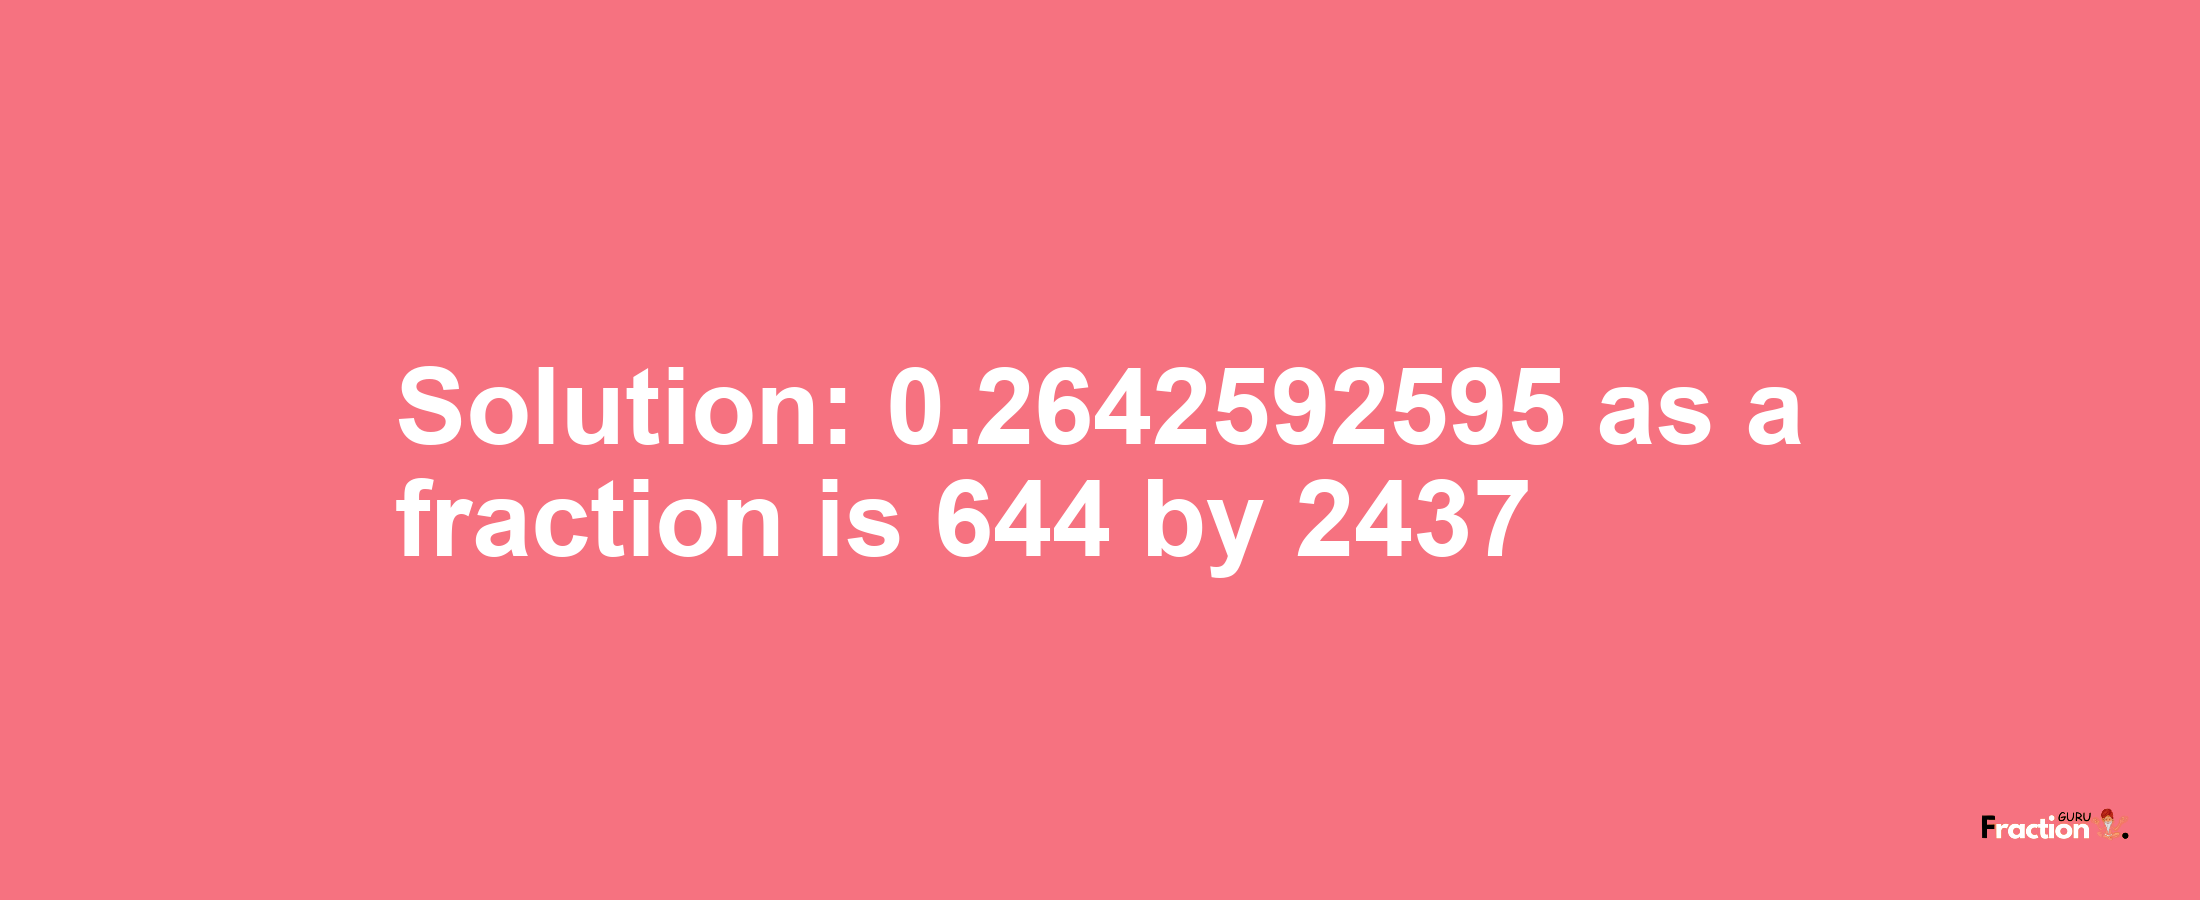 Solution:0.2642592595 as a fraction is 644/2437